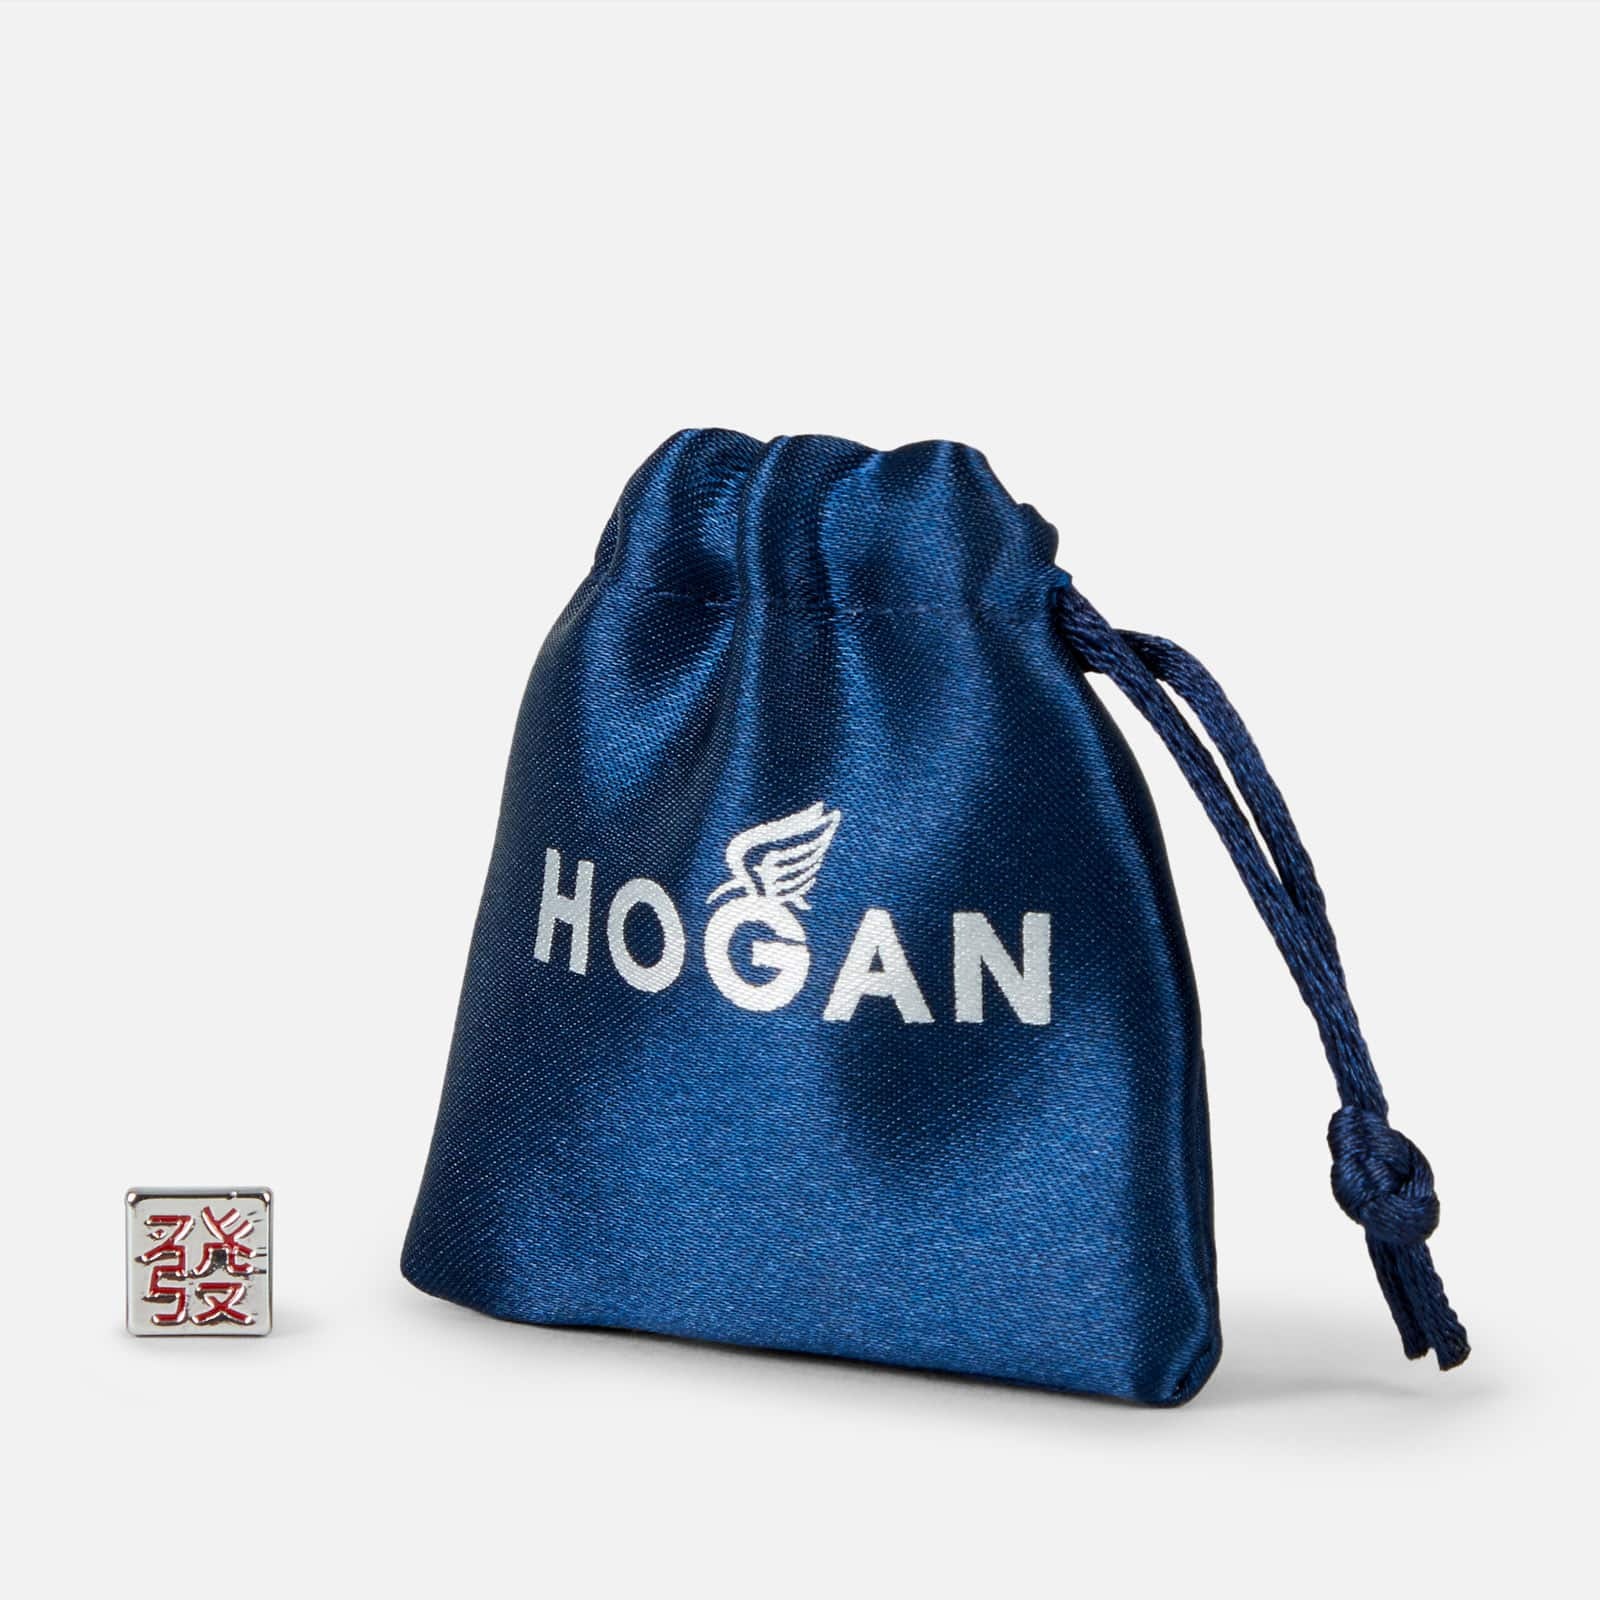 Hogan By You - Shoelace Bead Blue - 2